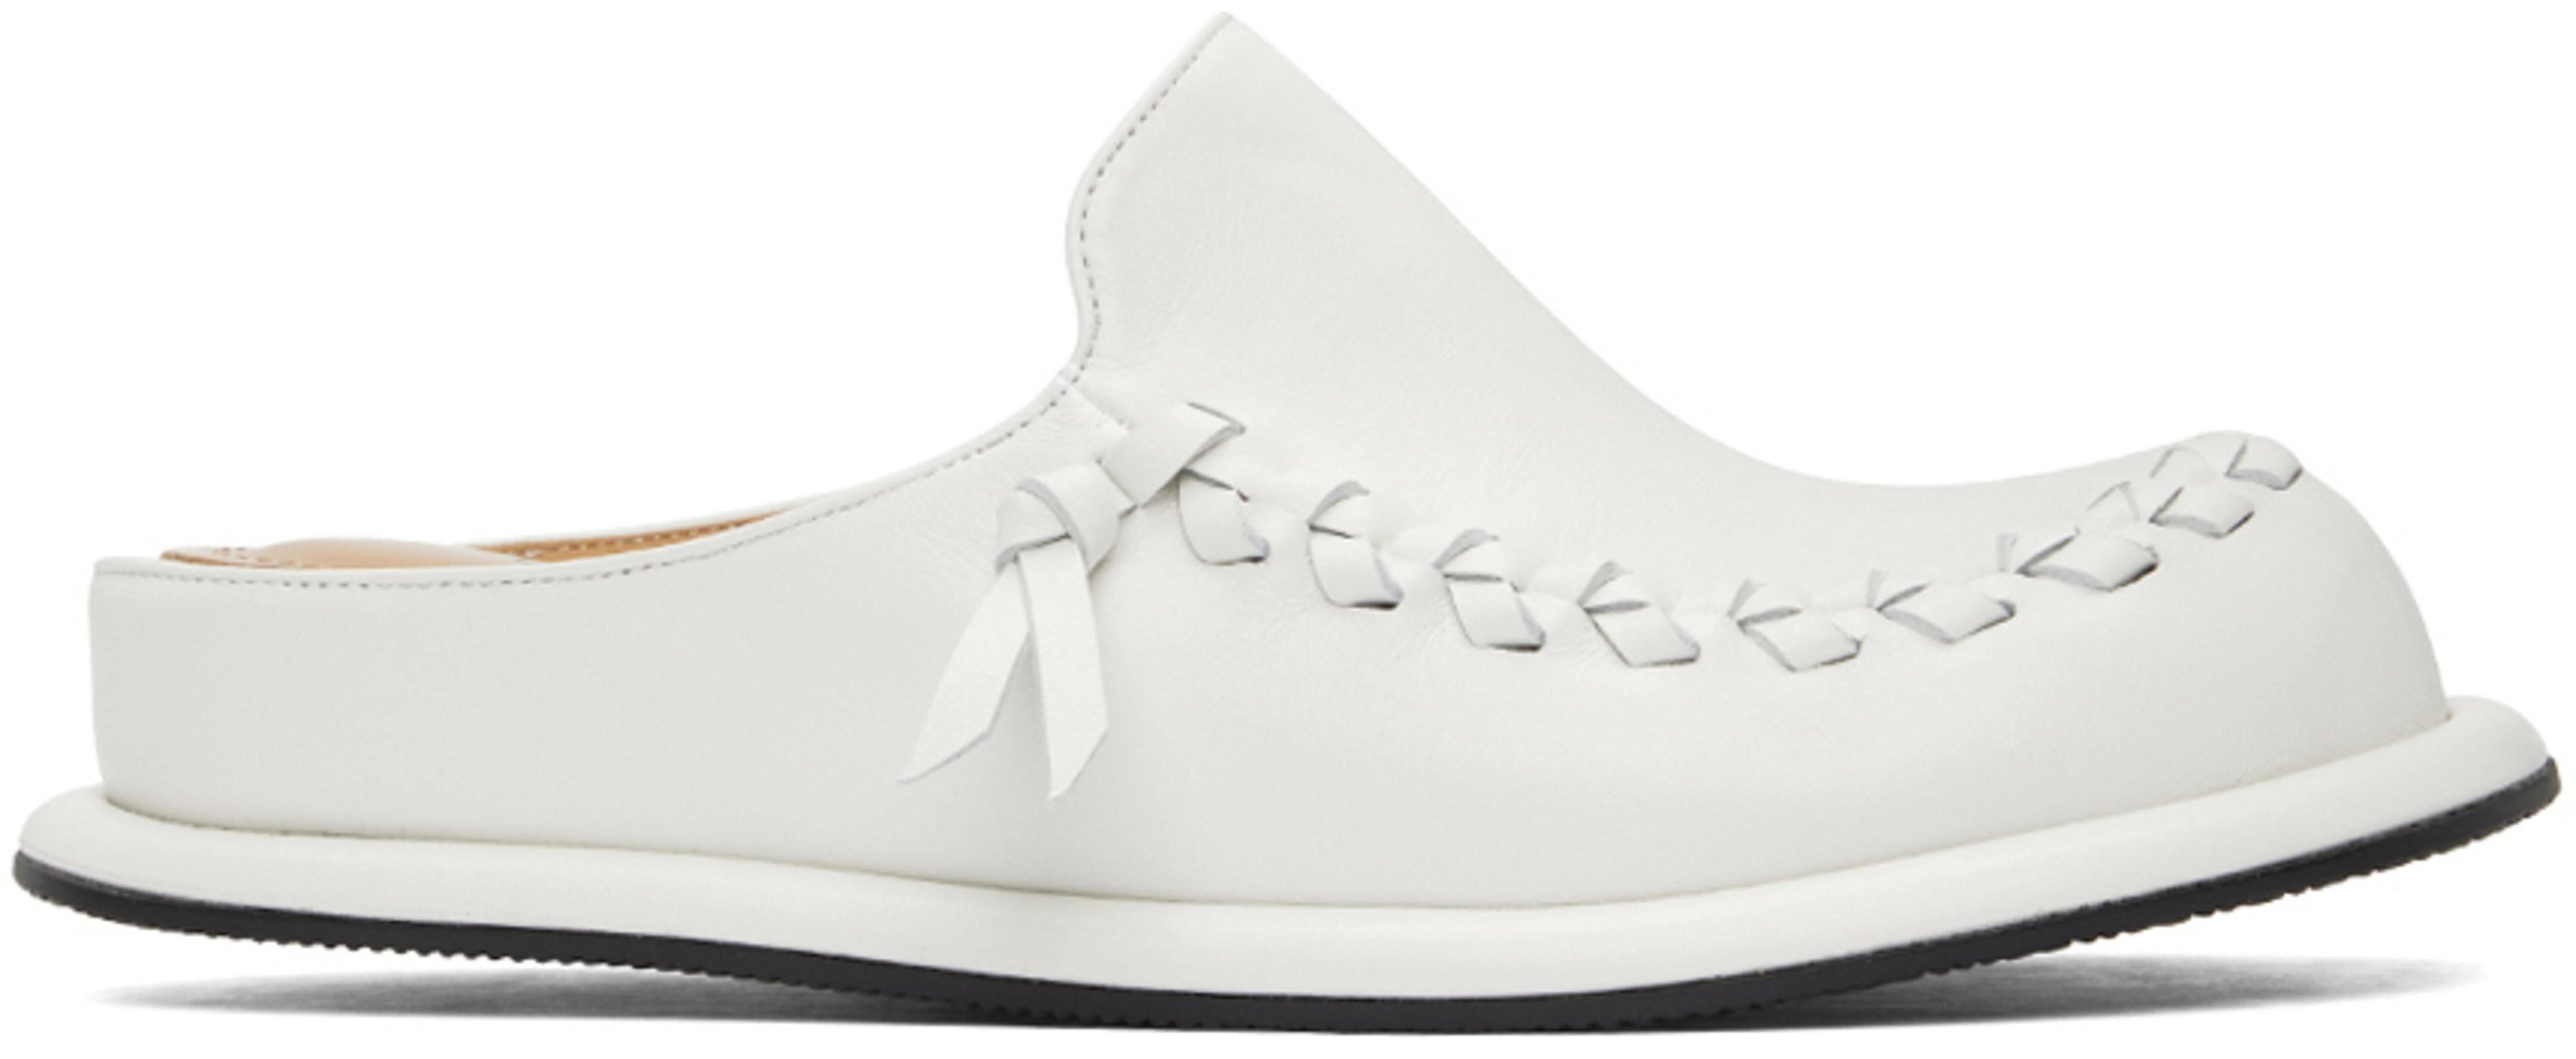 SSENSE Exclusive White Freed Loafers by COMME SE-A